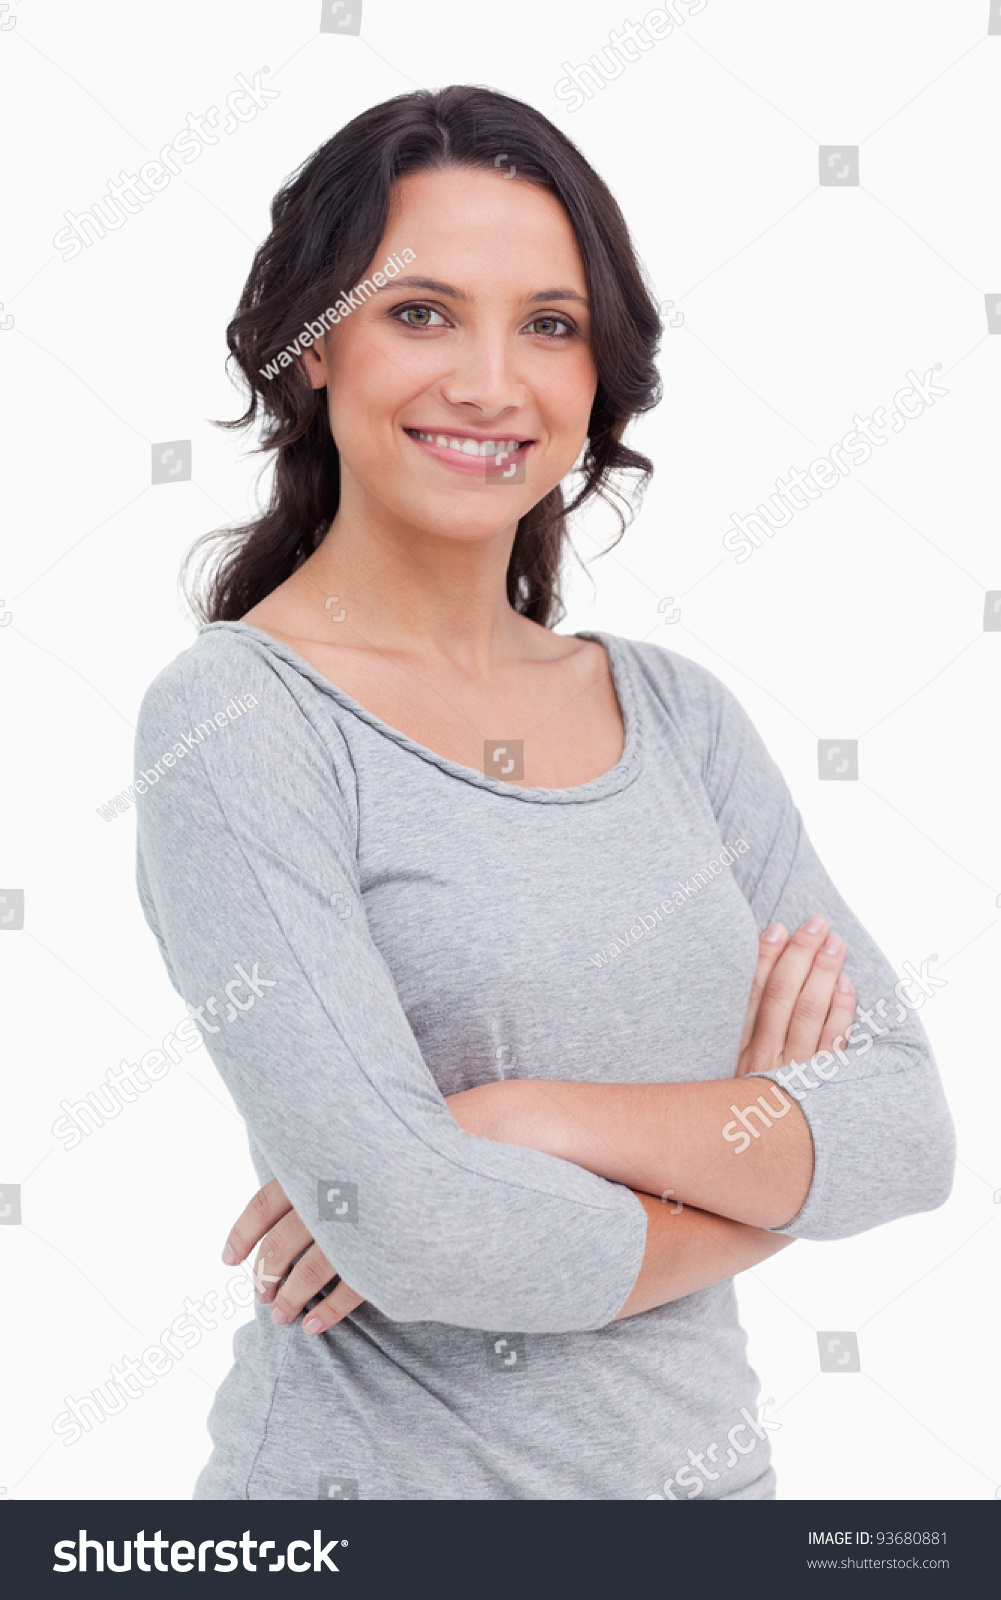 Close Up Of Smiling Young Woman With Her Arms Folded Against A White ...